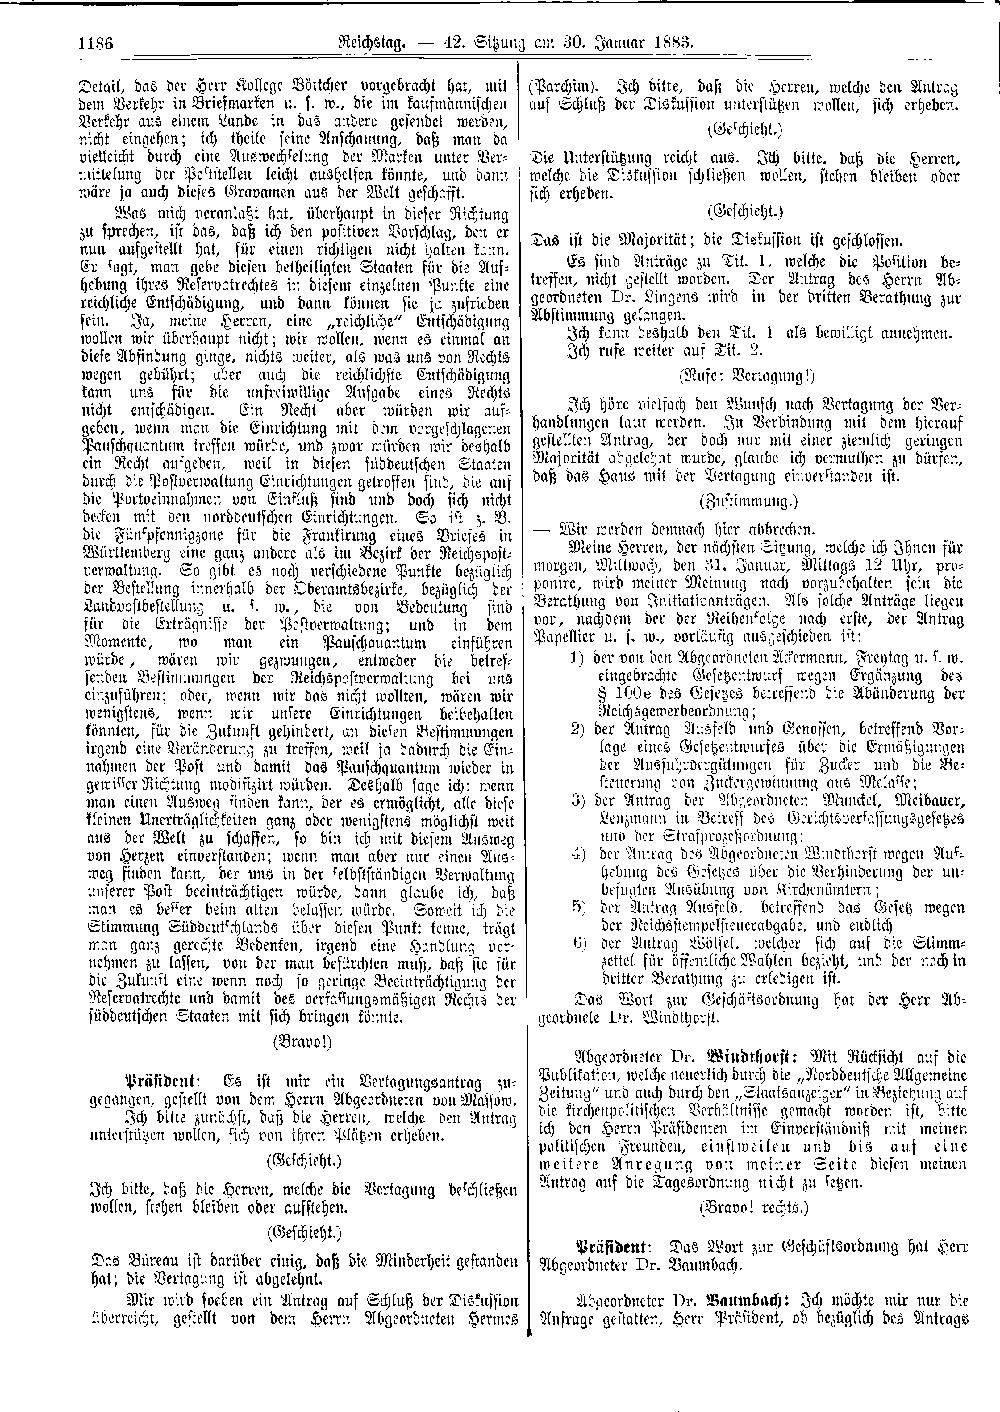 Scan of page 1186